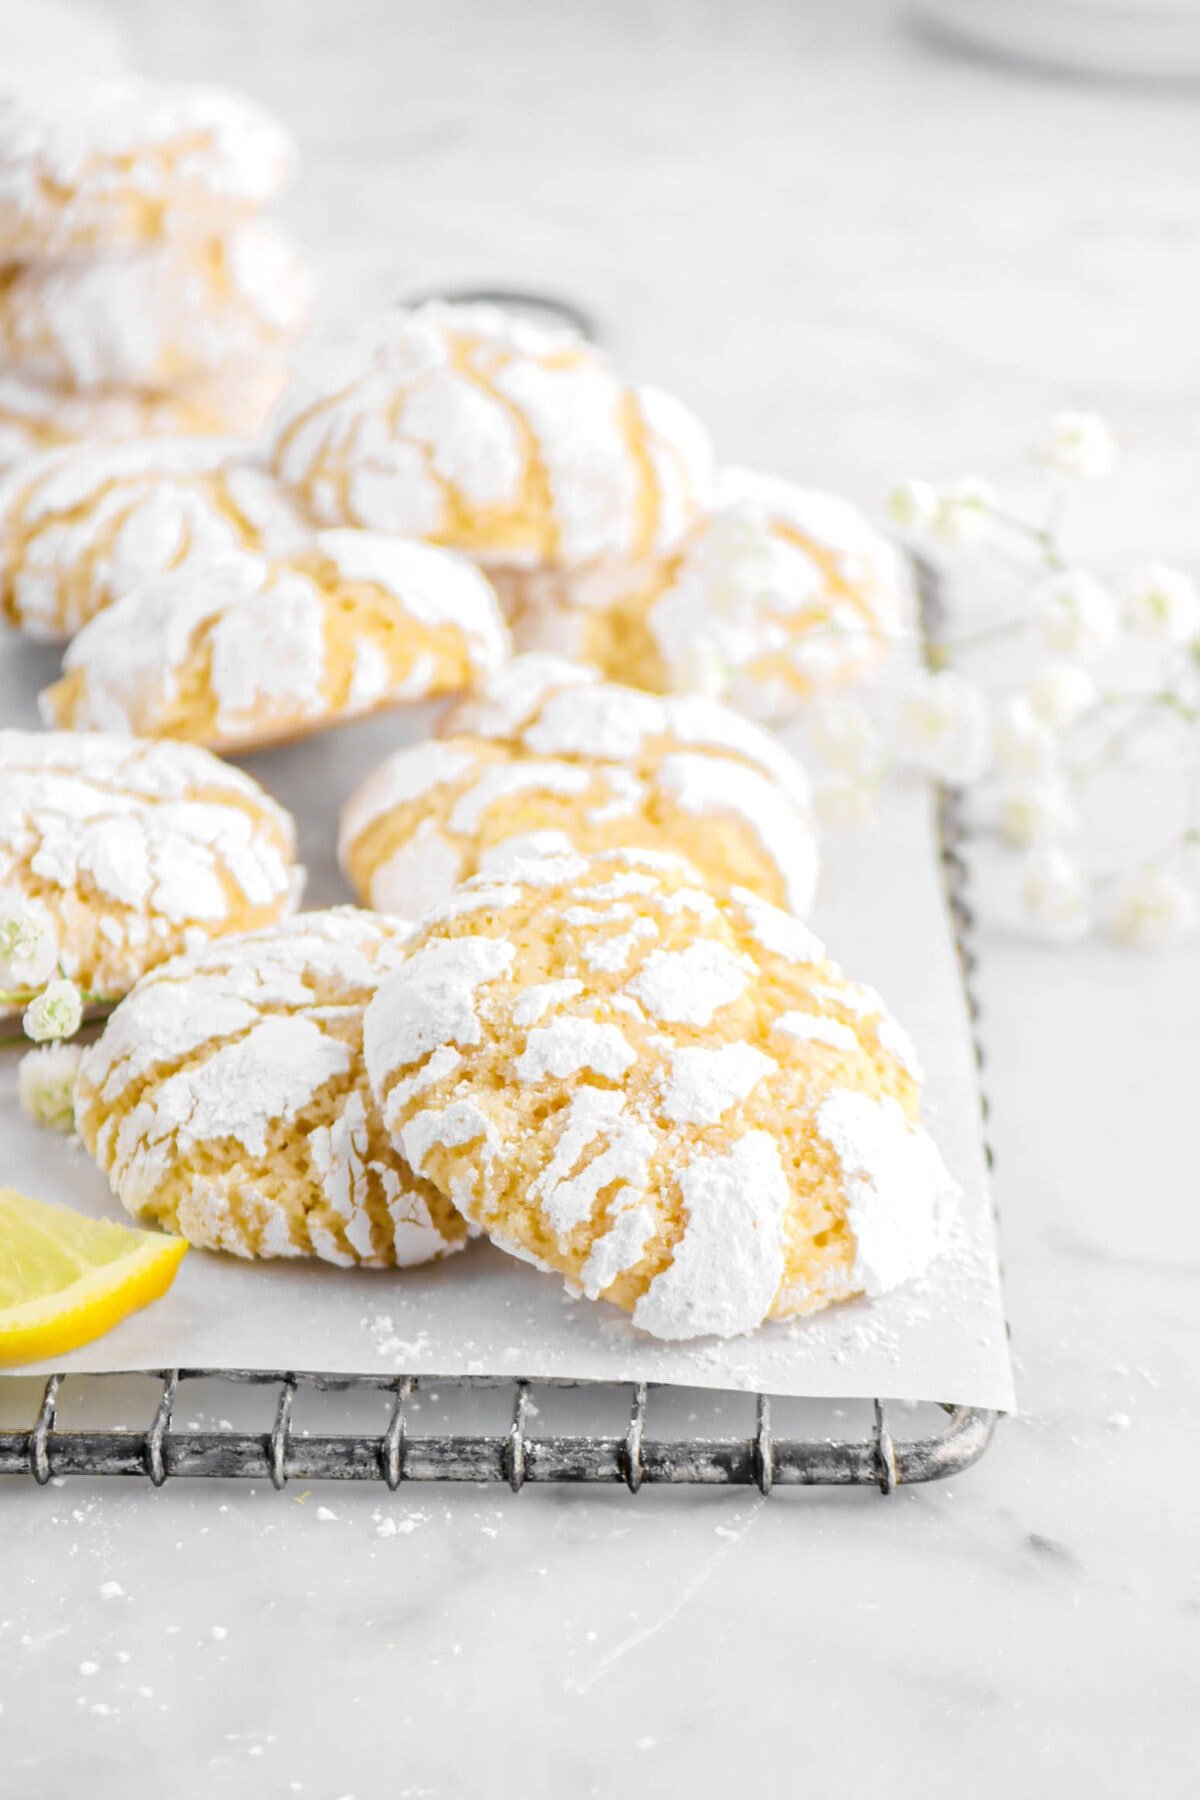 lemon crinkle cookies on small wire serving tray with parchment paper and flowers